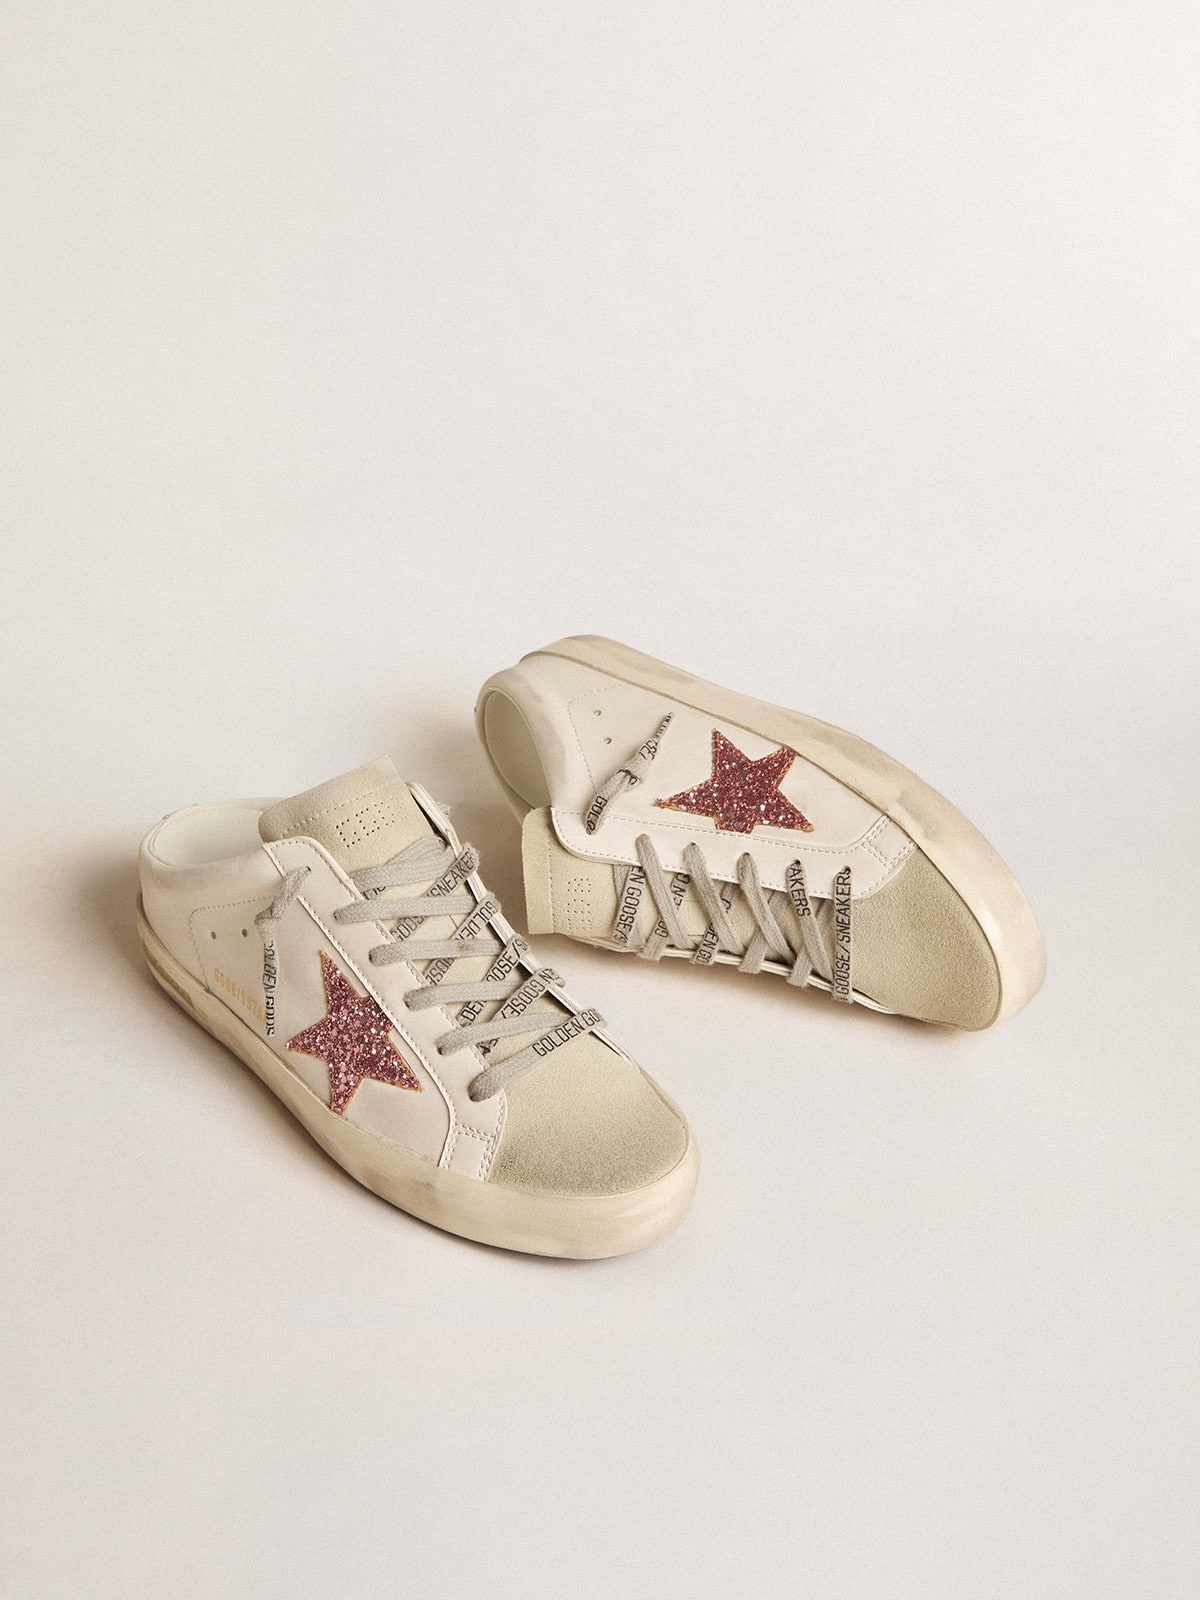 Bio-based Super-Star Sabot with pink glitter star and suede toe - 2